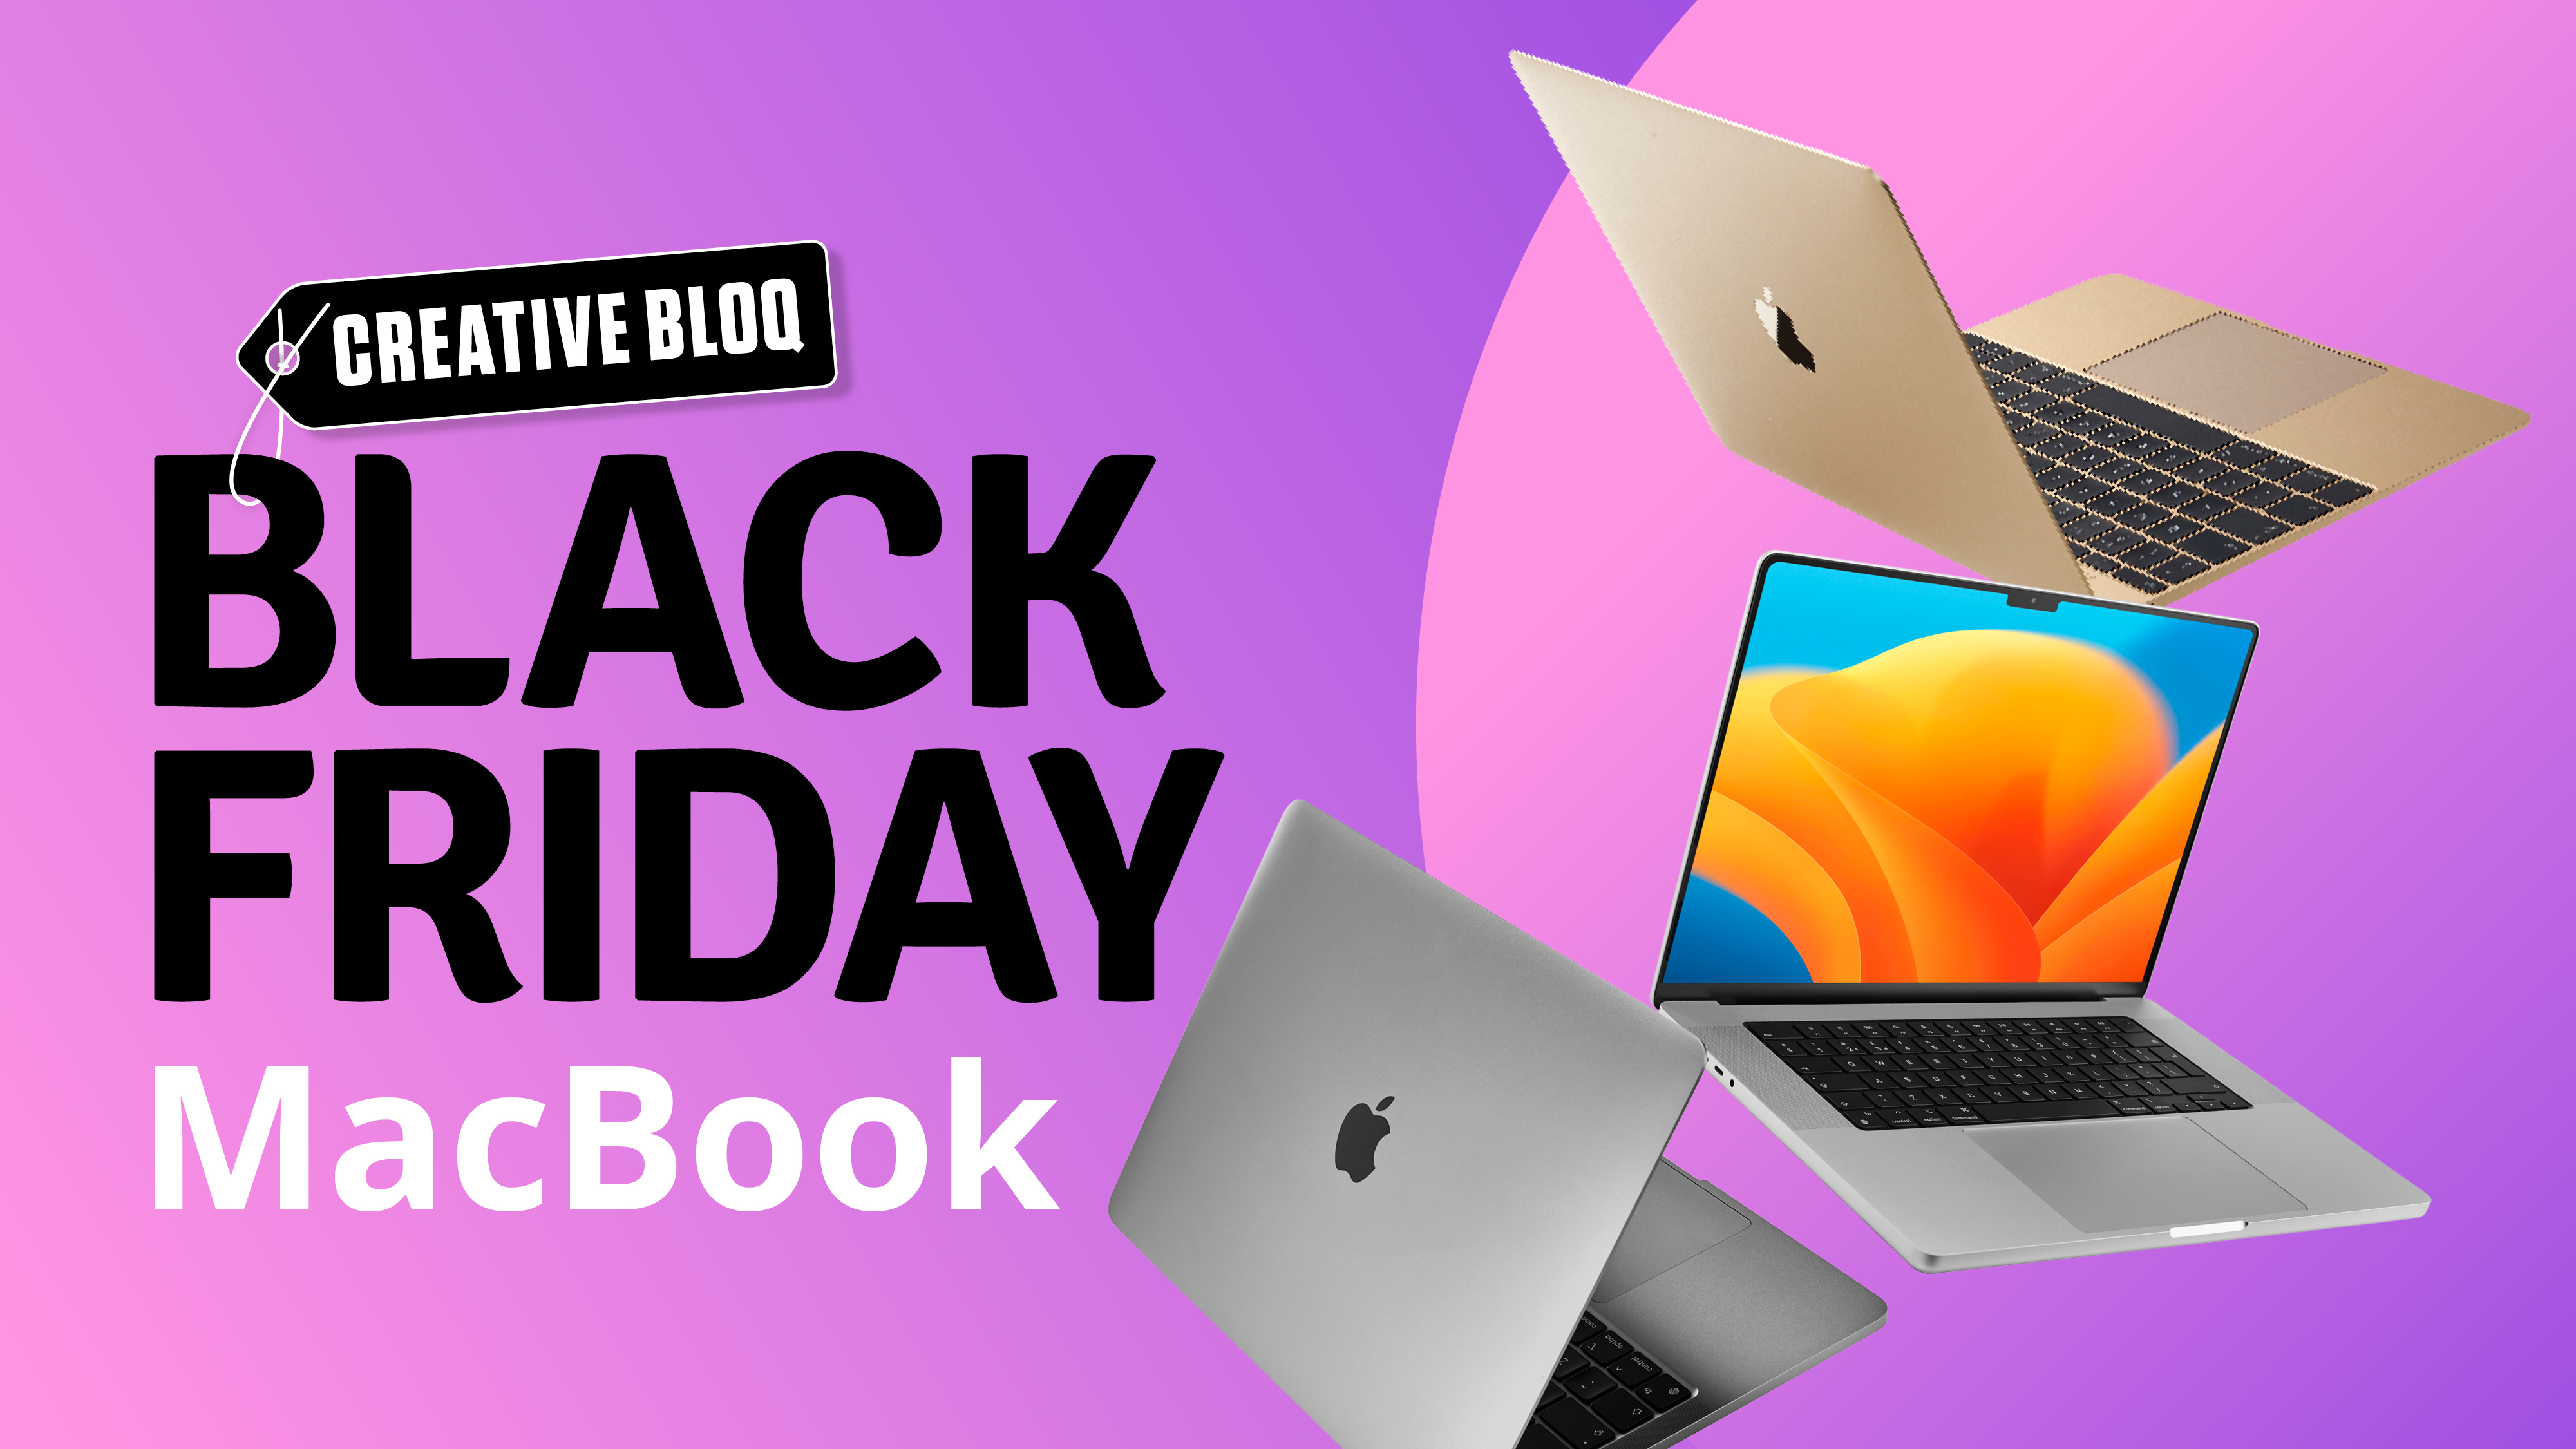 MacBook Black Friday deals 2022 The lowest prices this November